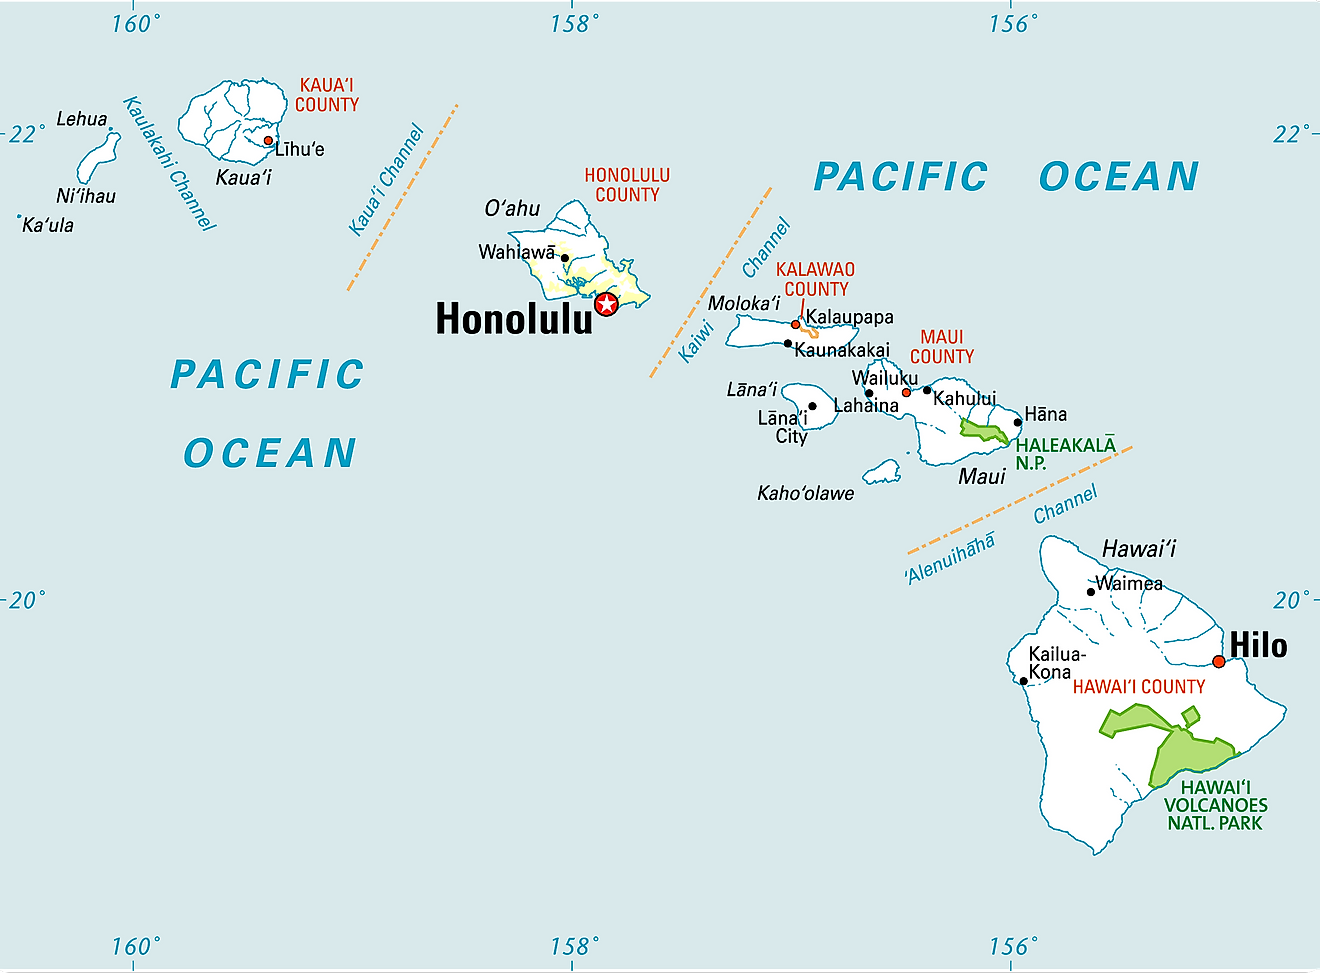 Administrative Map of Hawaii showing its 5 counties and the capital city - Honolulu